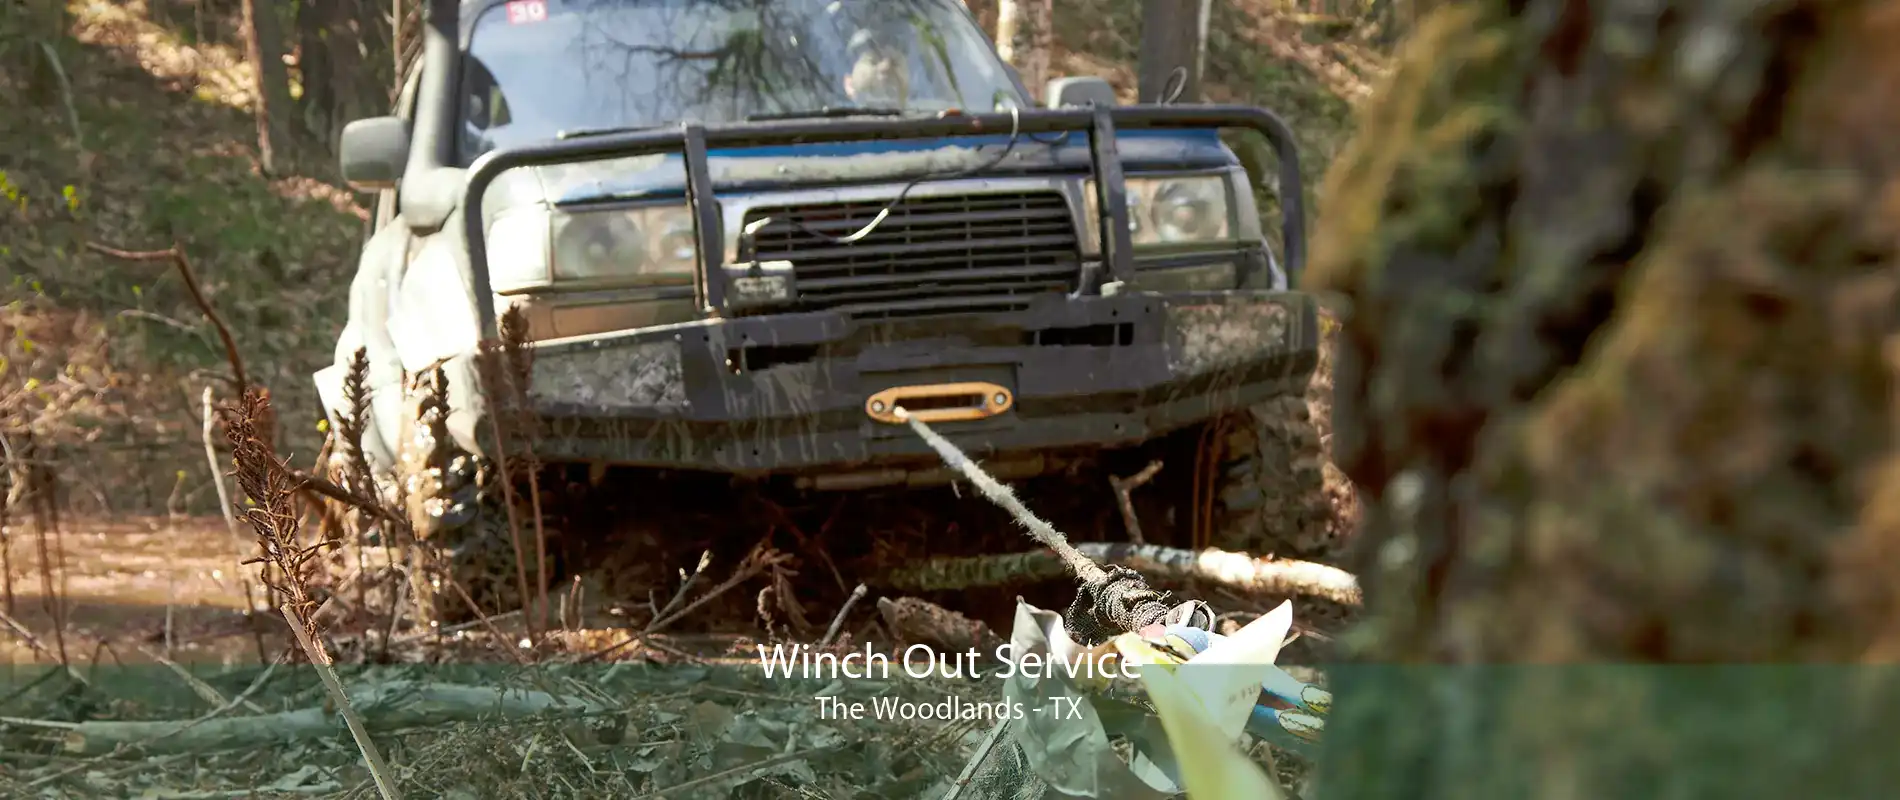 Winch Out Service The Woodlands - TX